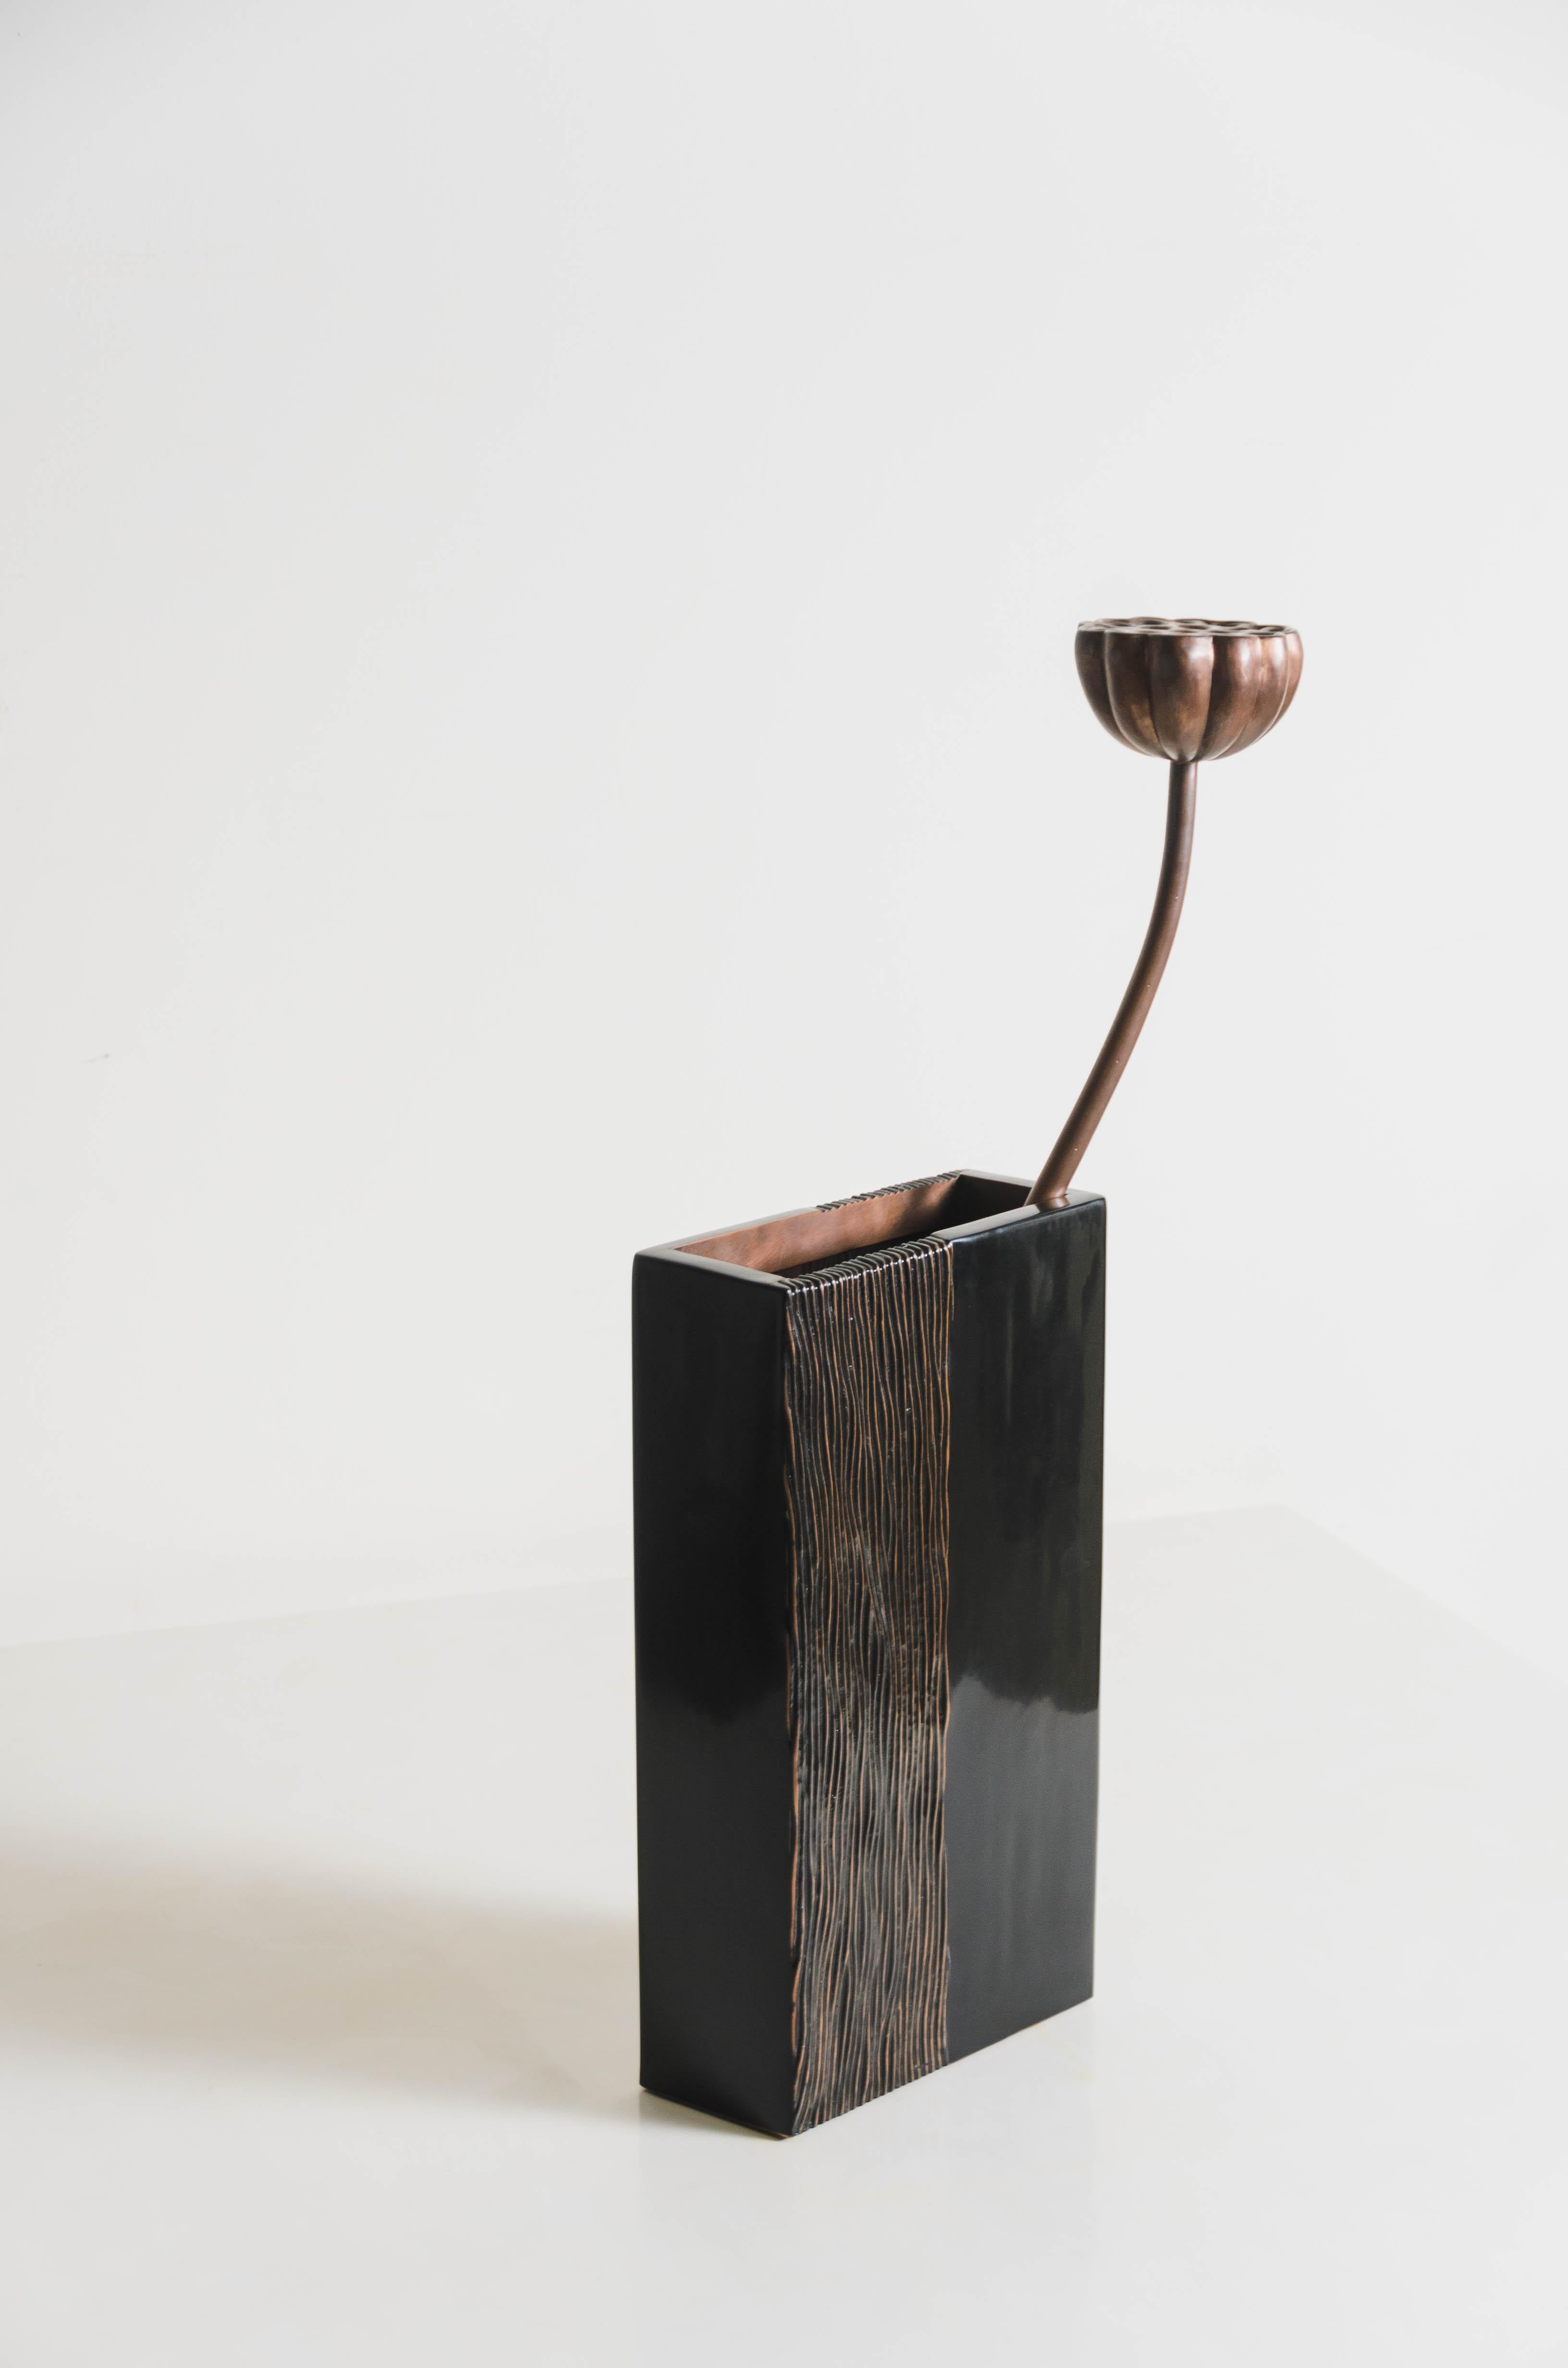 Copper Contemporary Block Vase w/ Pleats Design in Black Lacquer by Robert Kuo For Sale